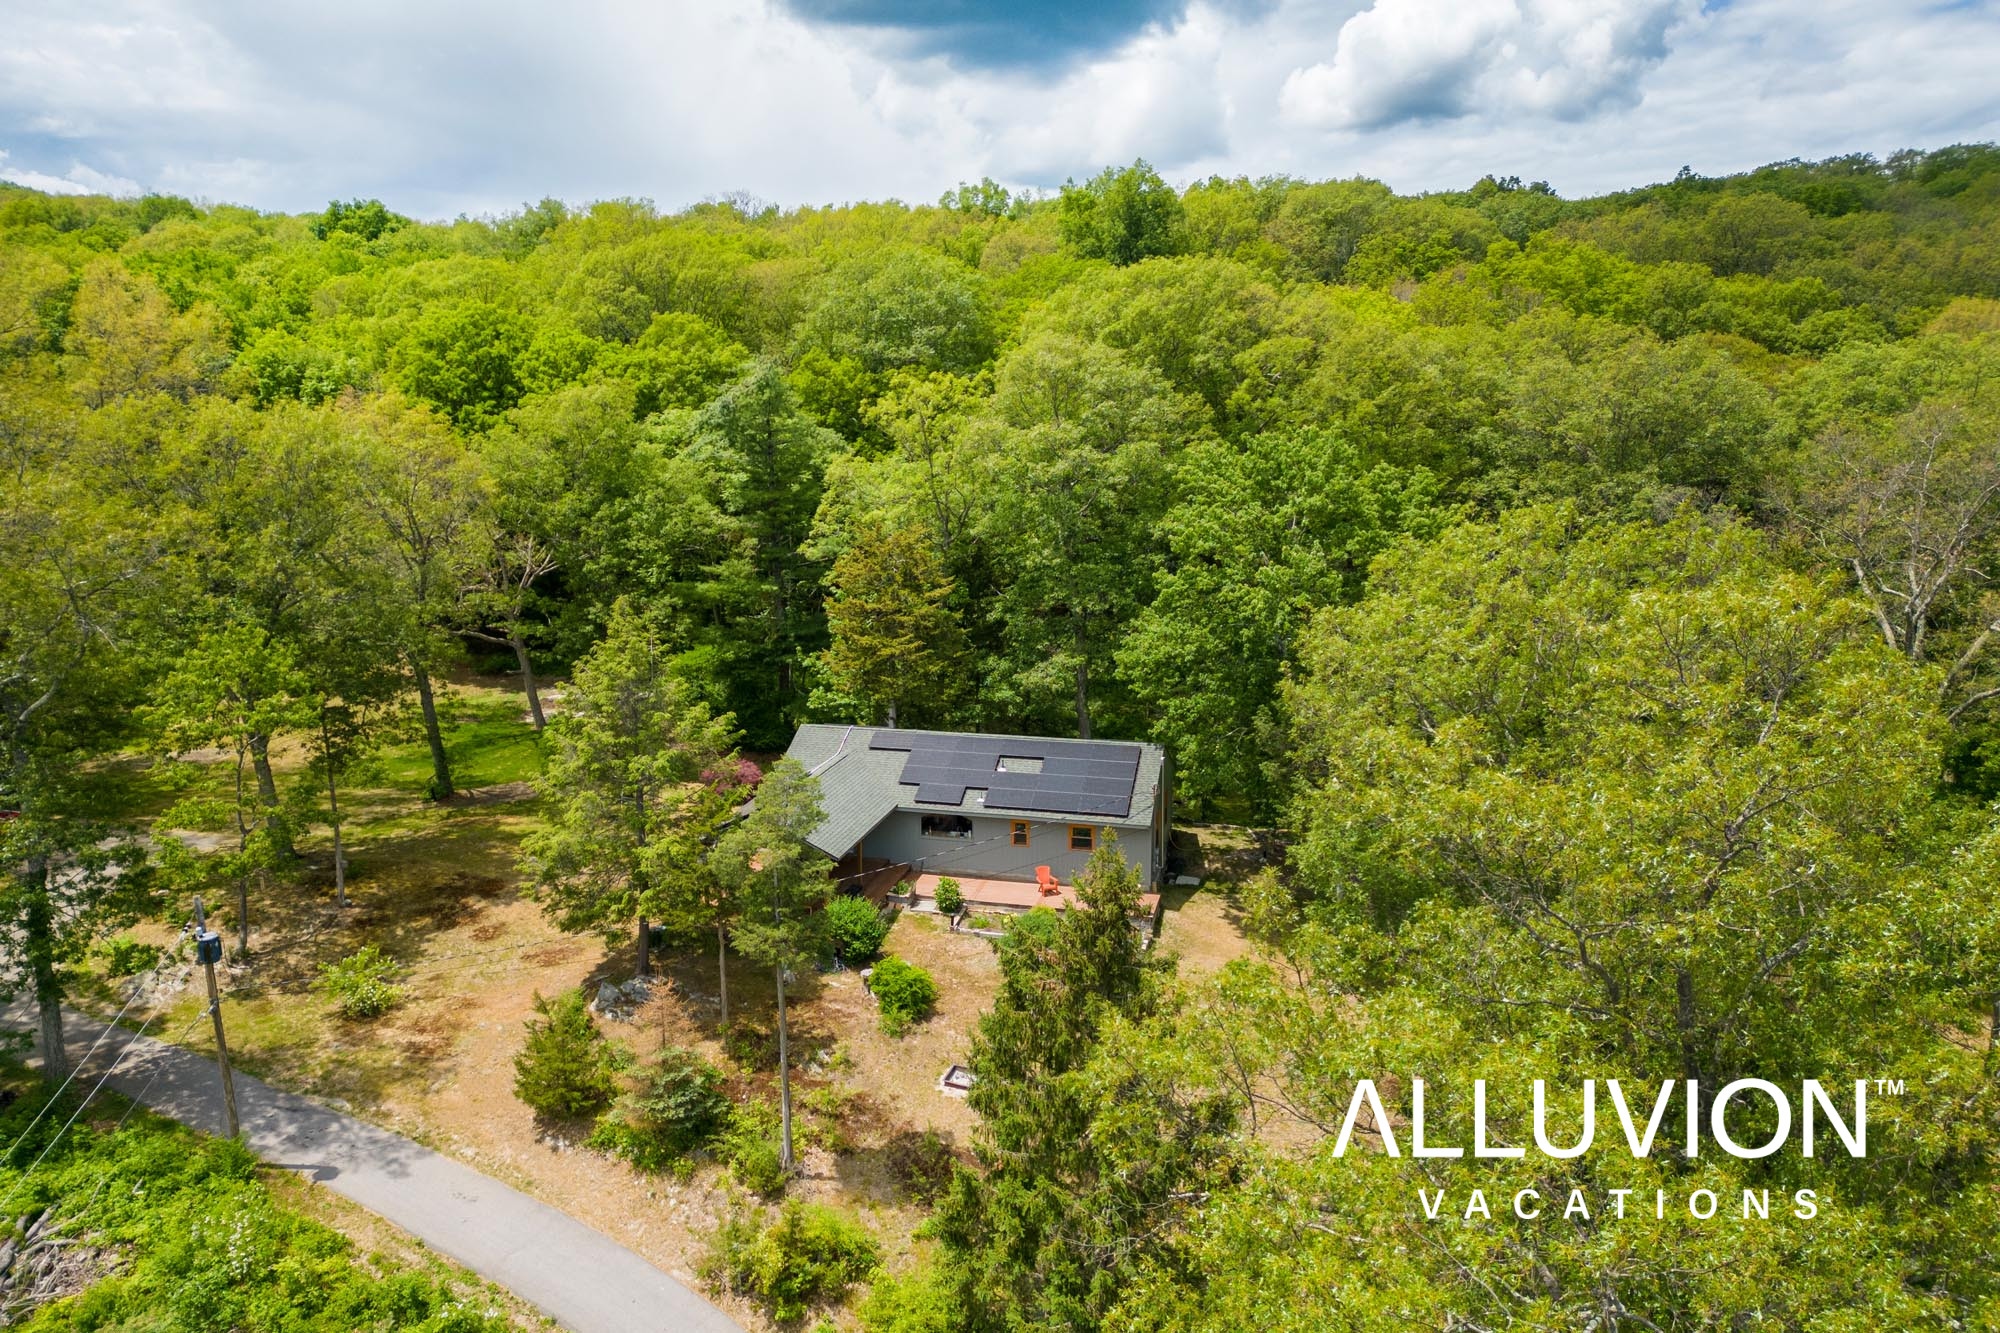 The Secluded Mountaintop Getaway: A Modern Rustic Cabin in the Hudson Valley – Book Now on Airbnb